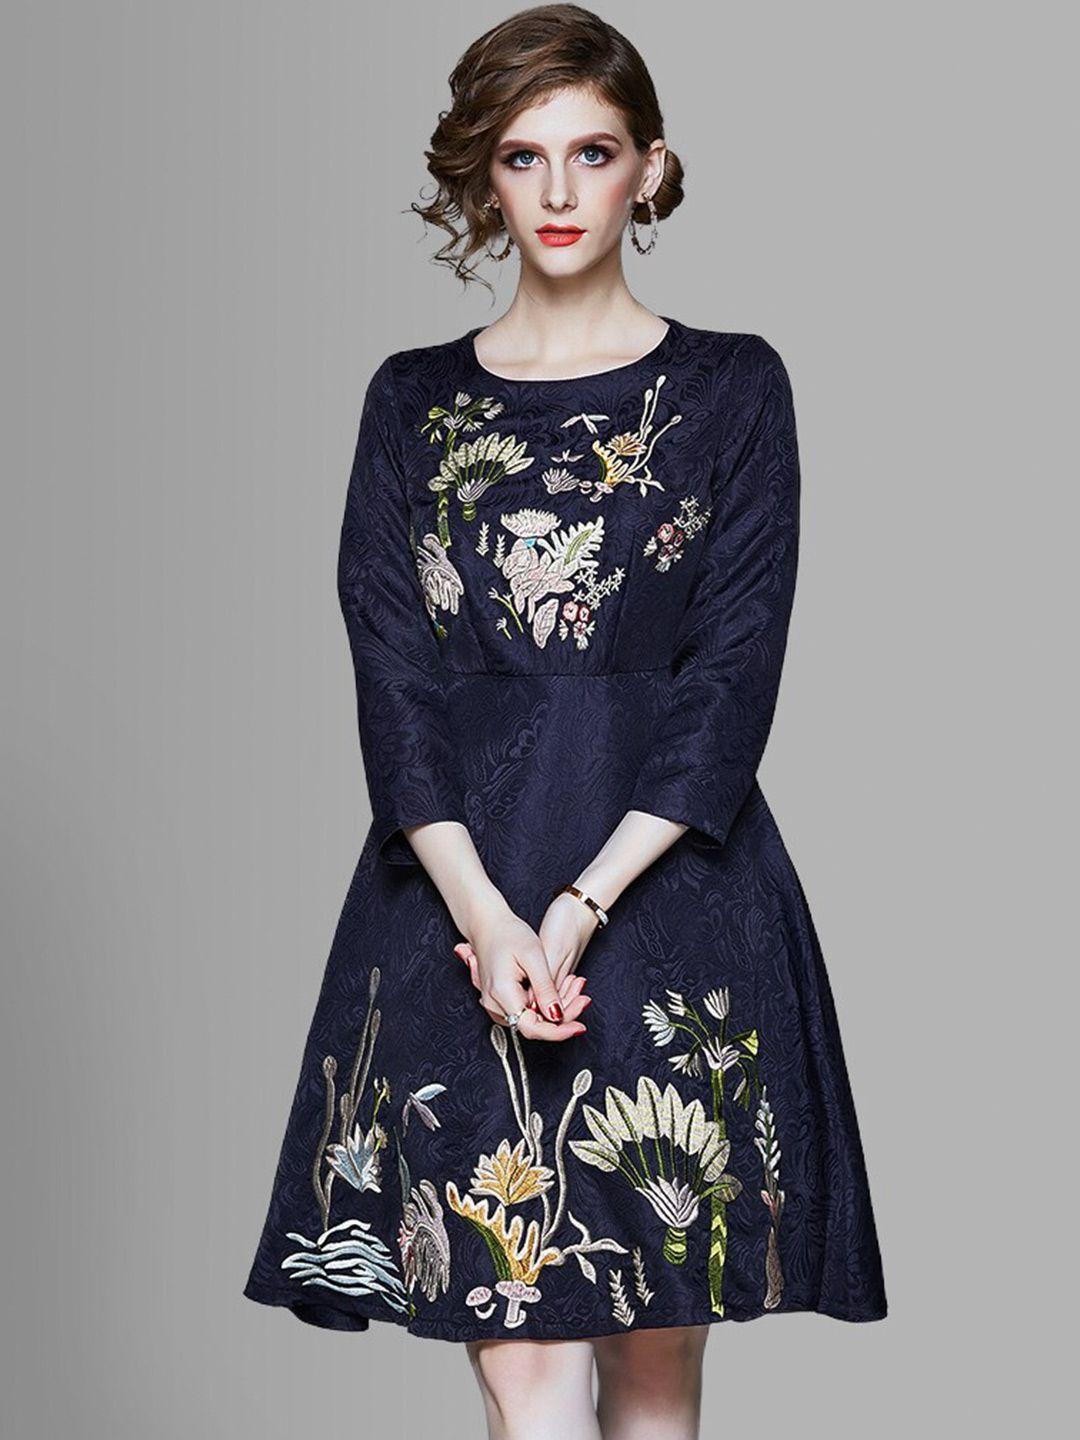 jc collection women navy blue floral embroidered fit & flare dress